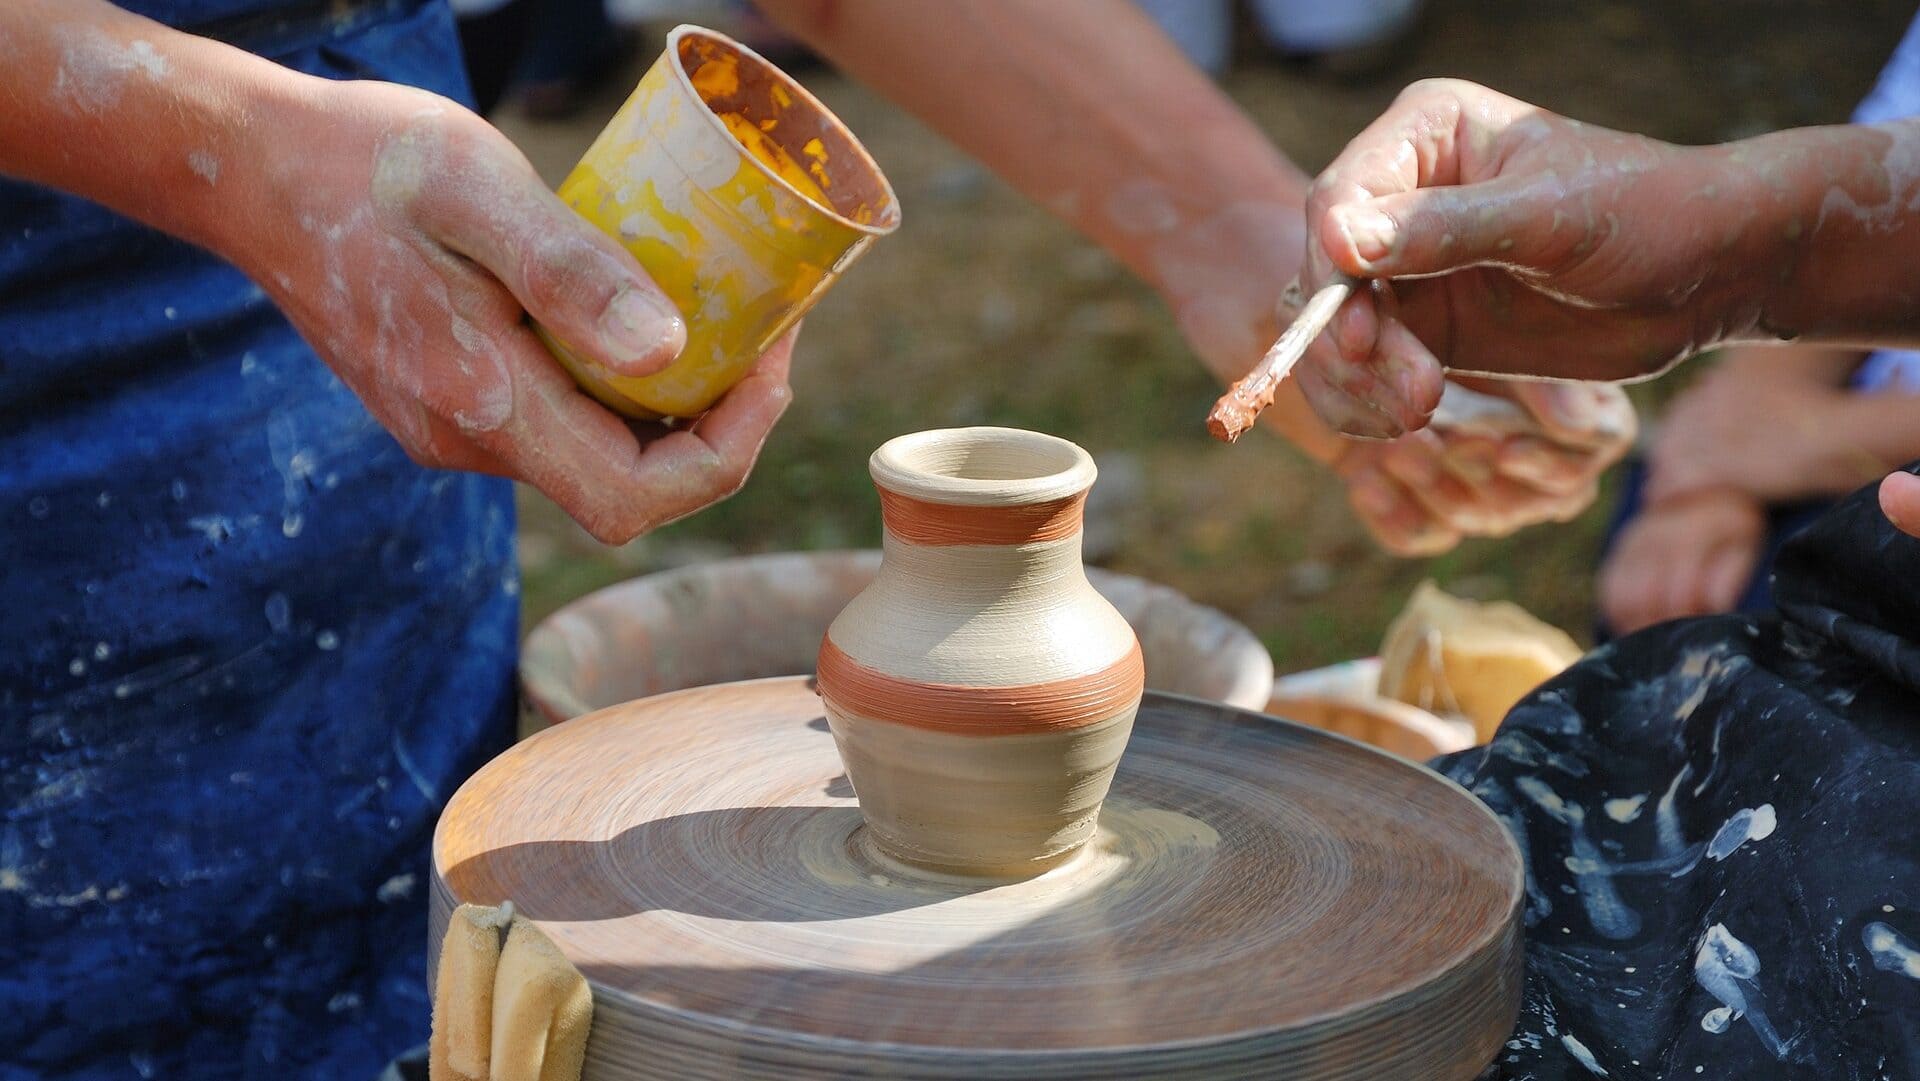 Image: People using their hands to create pottery.